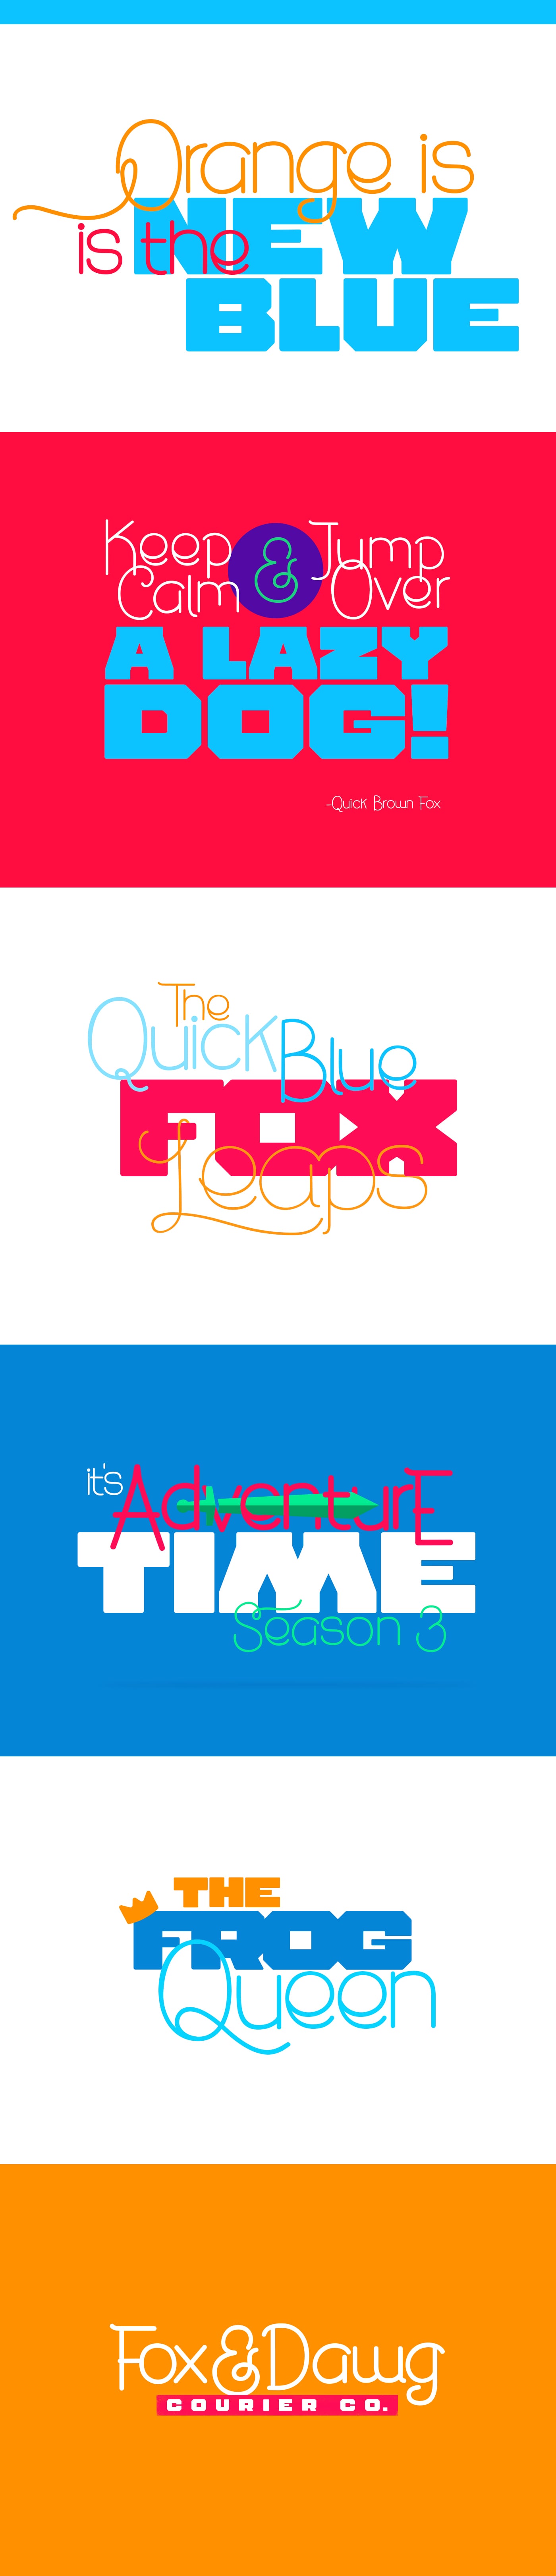 Some colorful examples of font using.